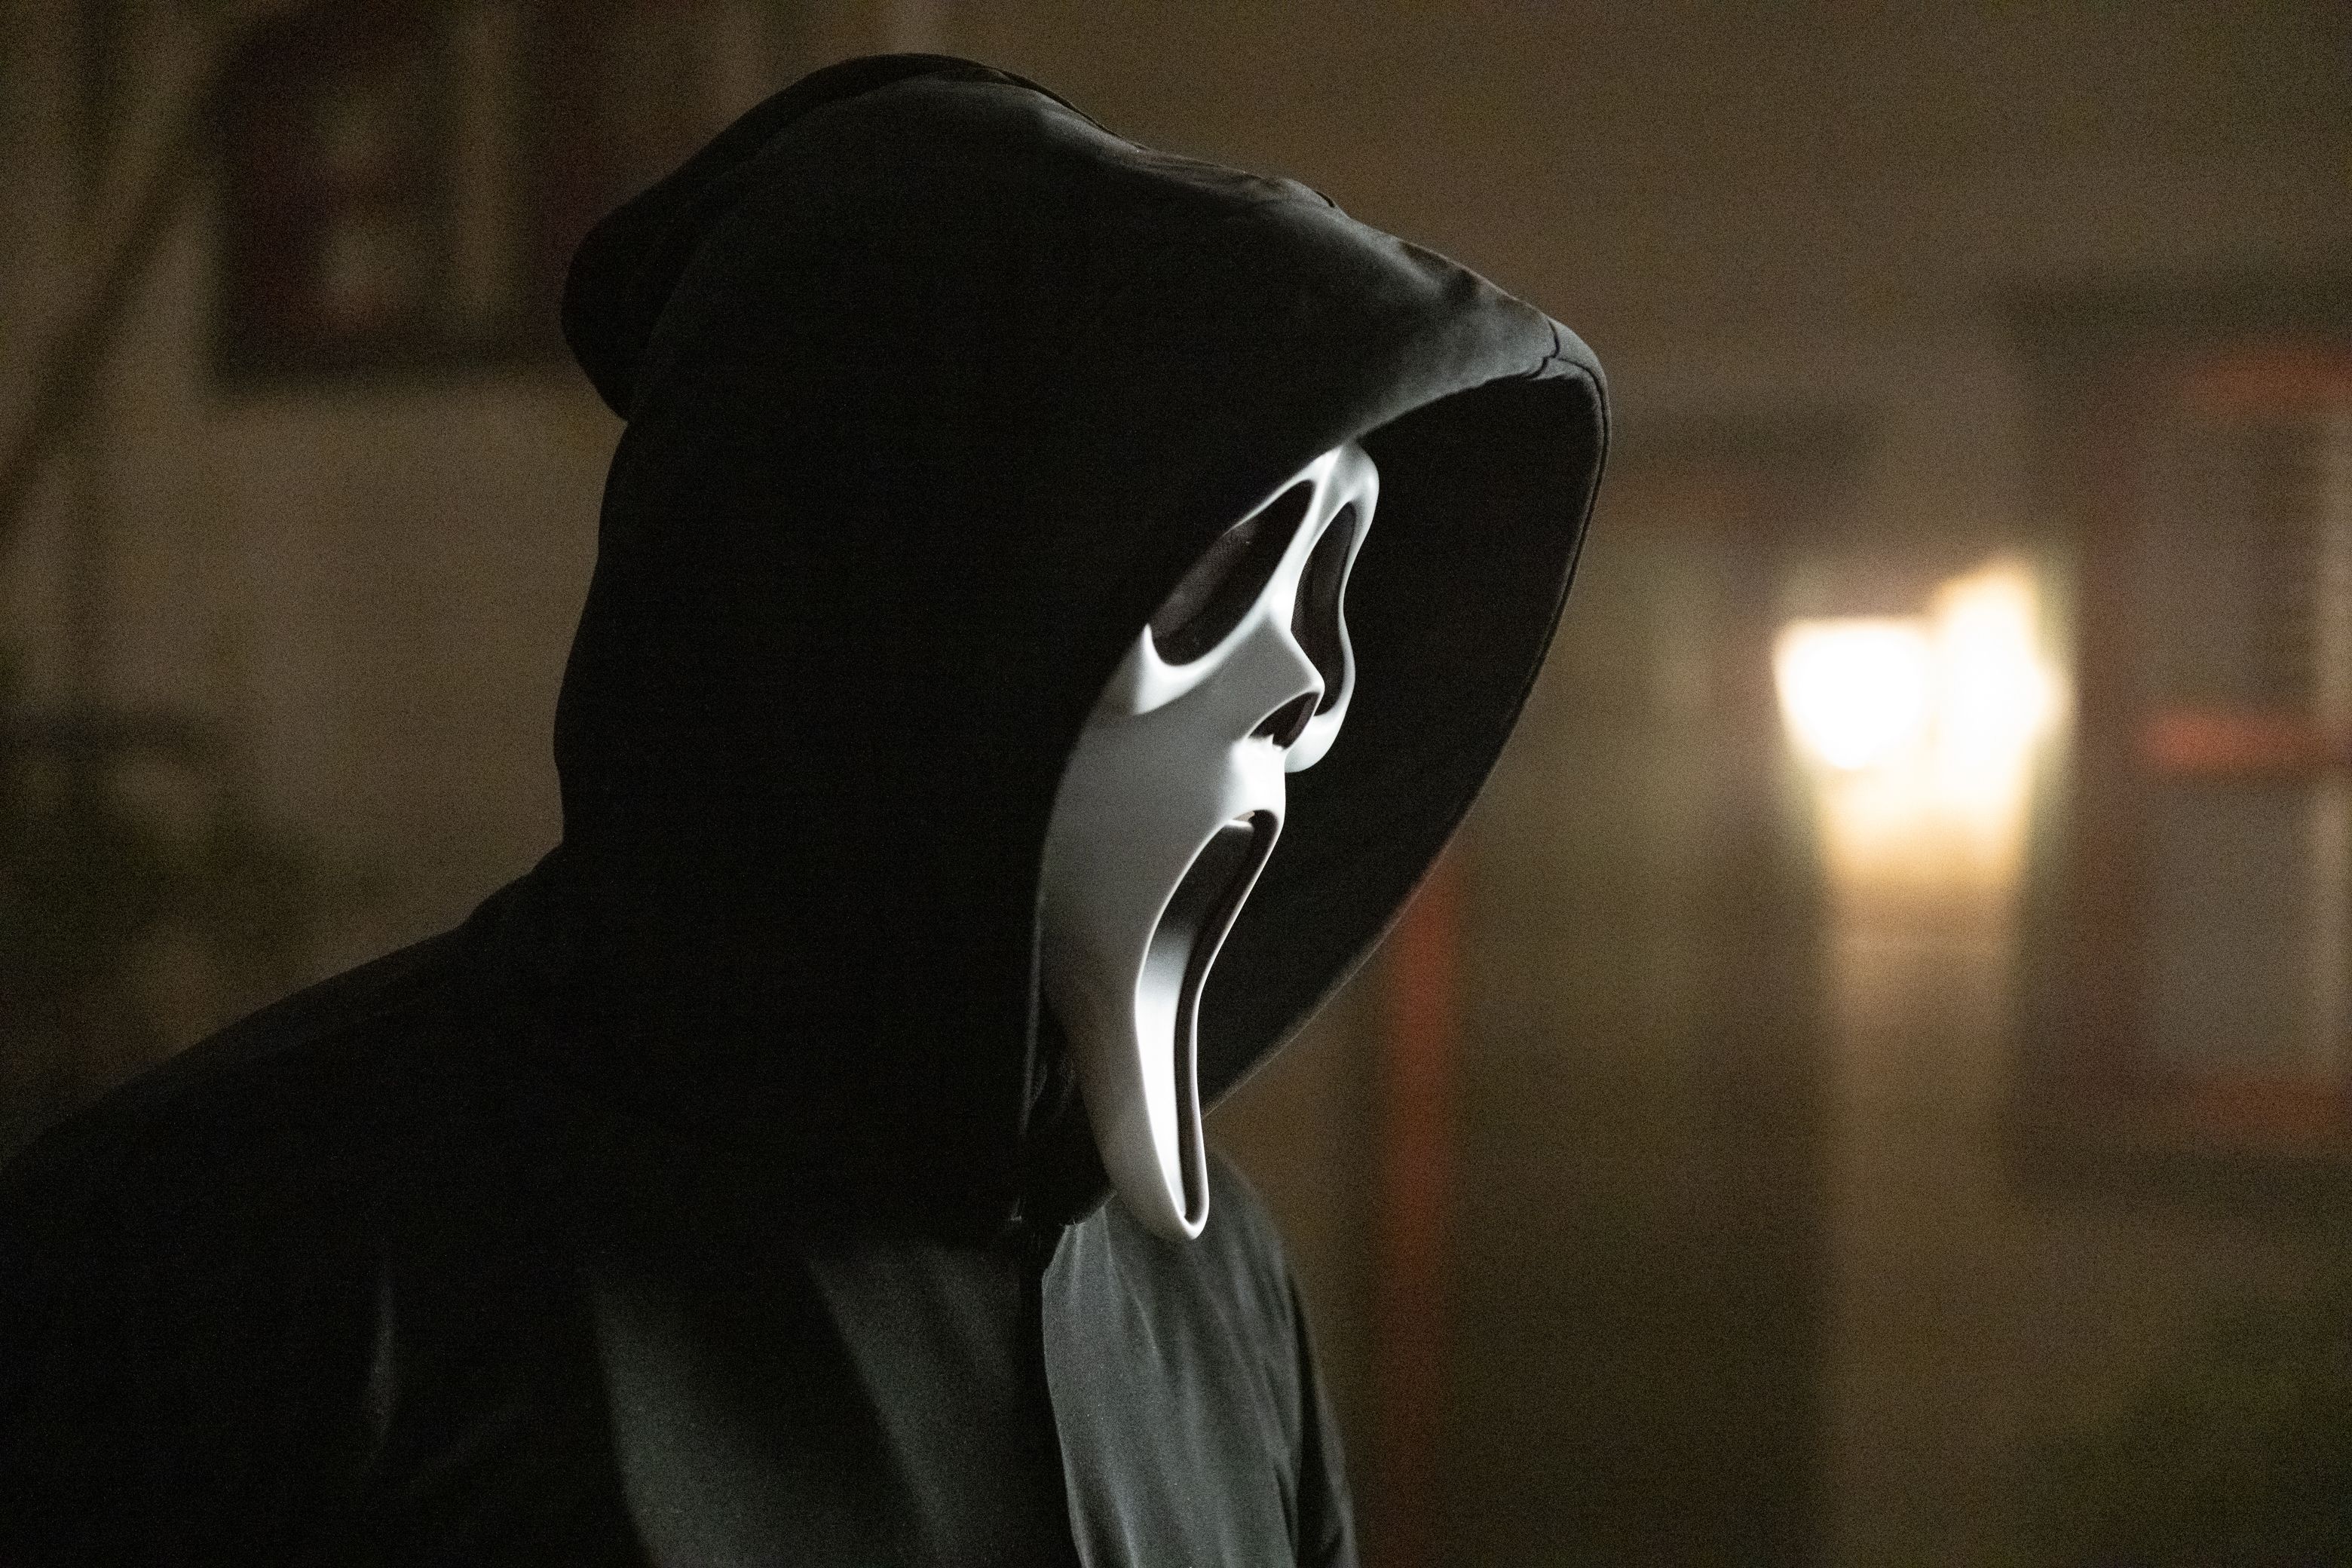 Scream 5 Image Highlight New and Returning Cast Members